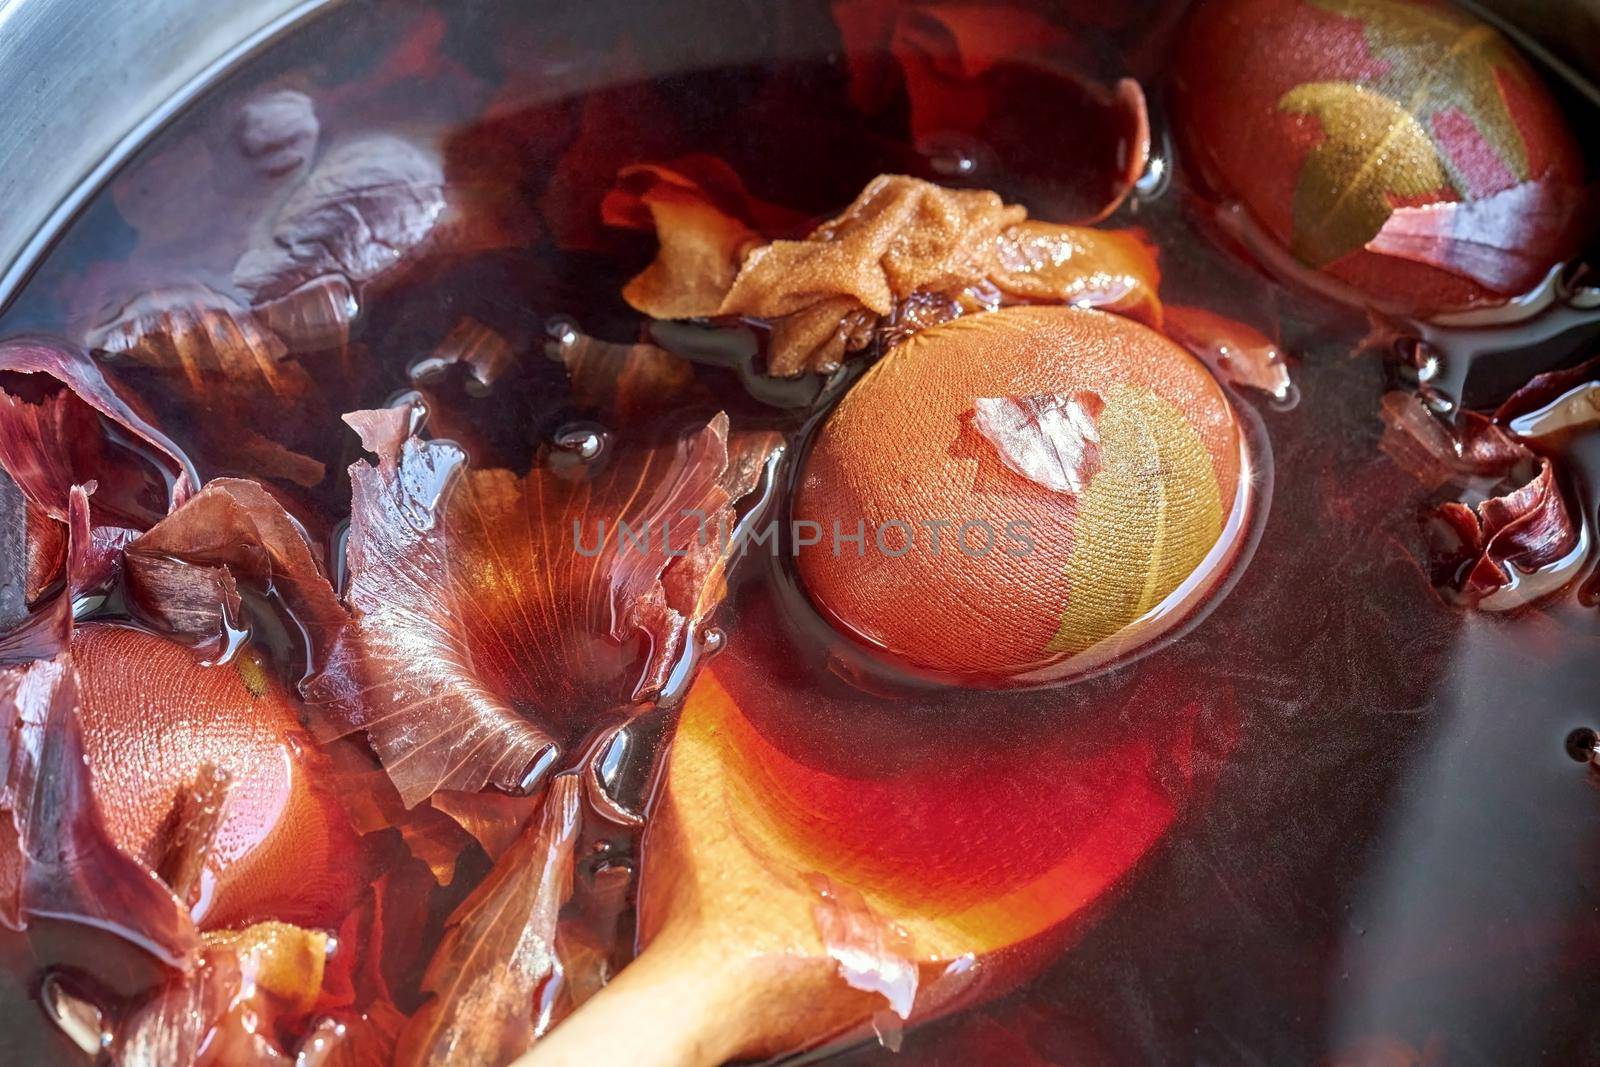 Dyeing Easter eggs with onion peels - cooking the eggs in a pot by madeleine_steinbach